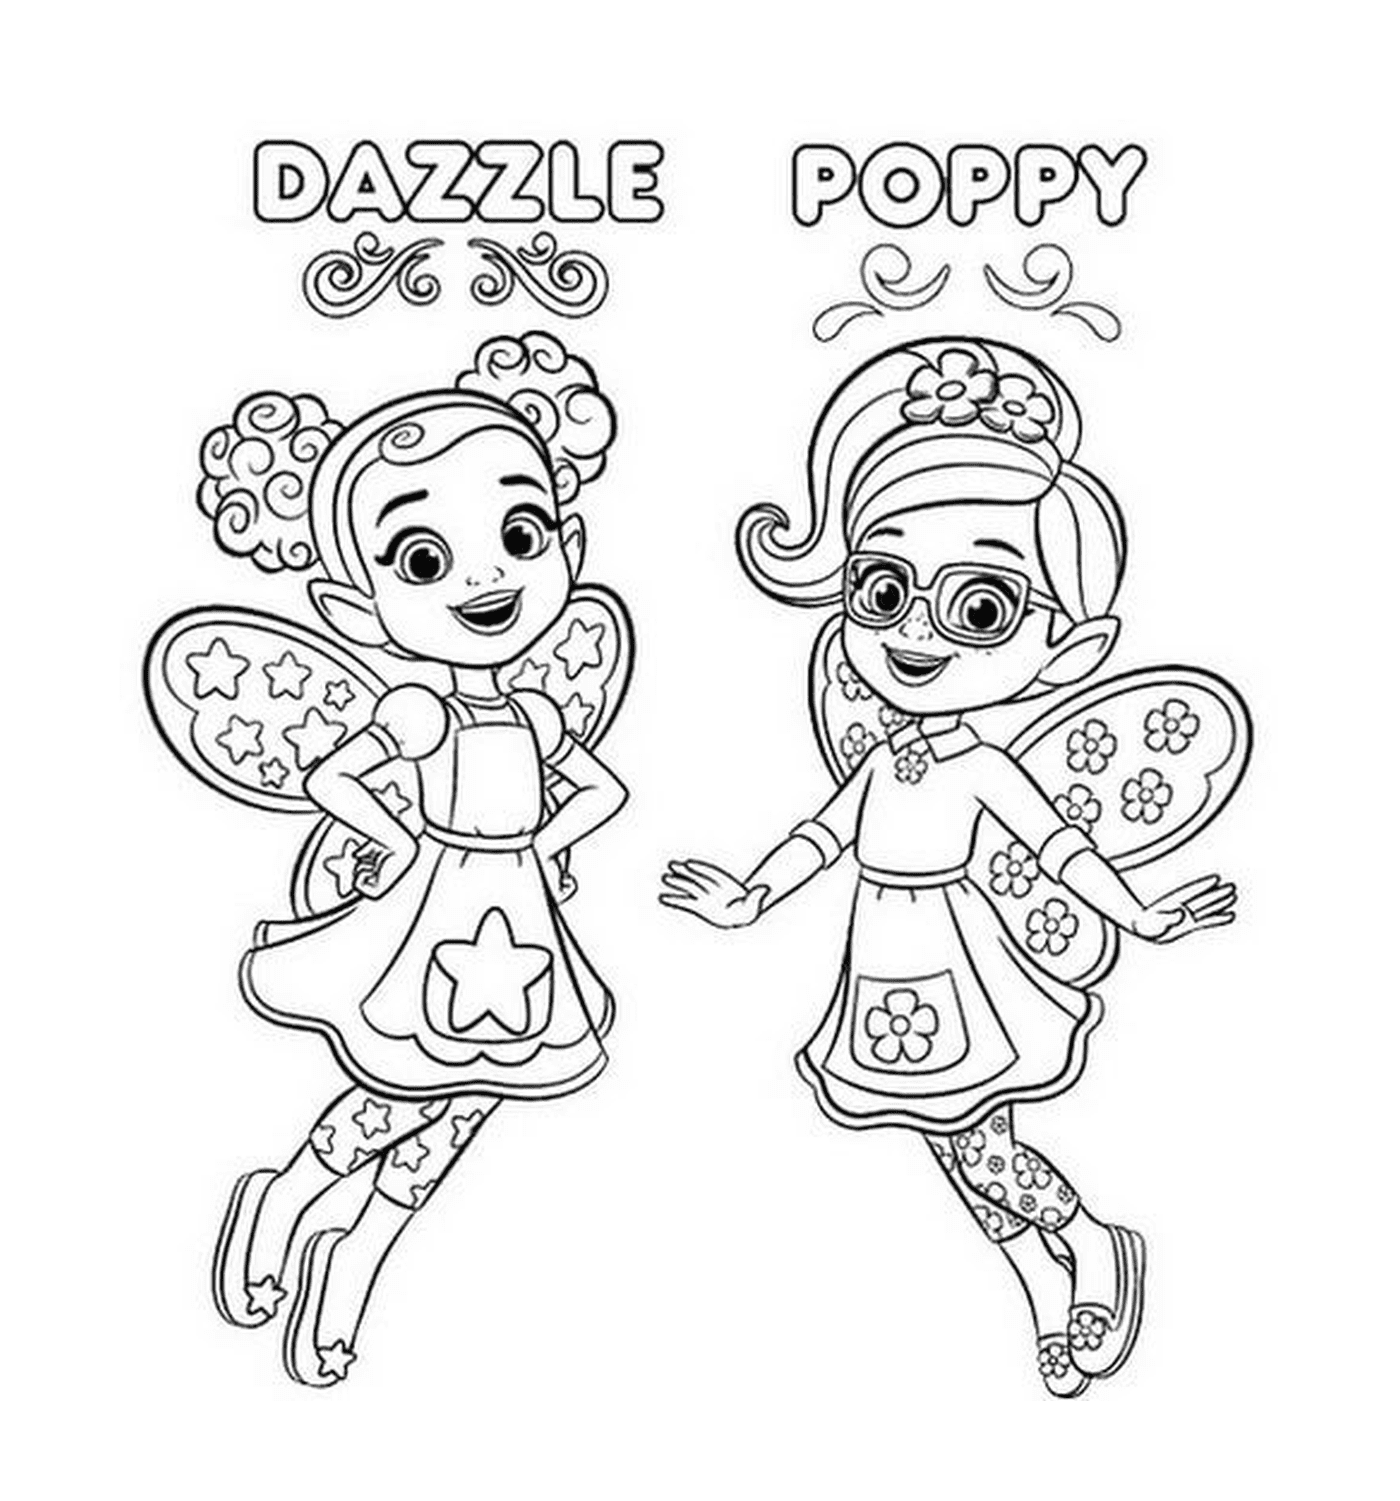  The little girls Dazzle and Poppy of Butterbean Café 